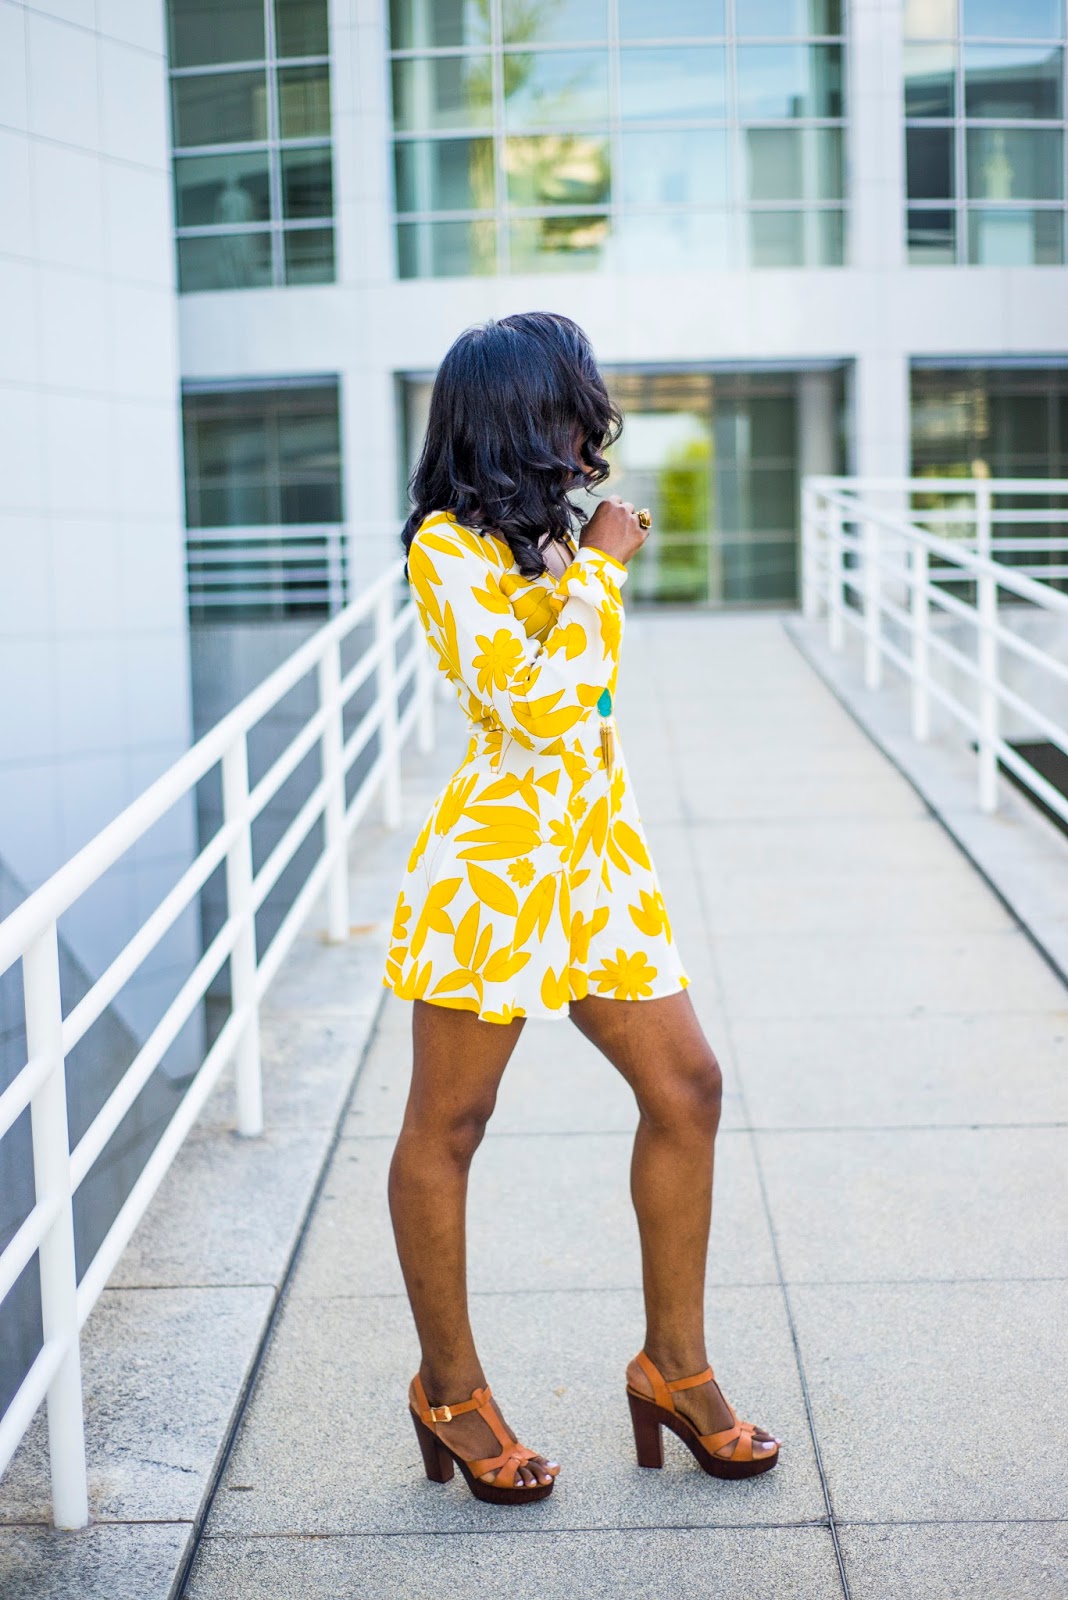 Romper: 70's style for the summer - Titi's Passion